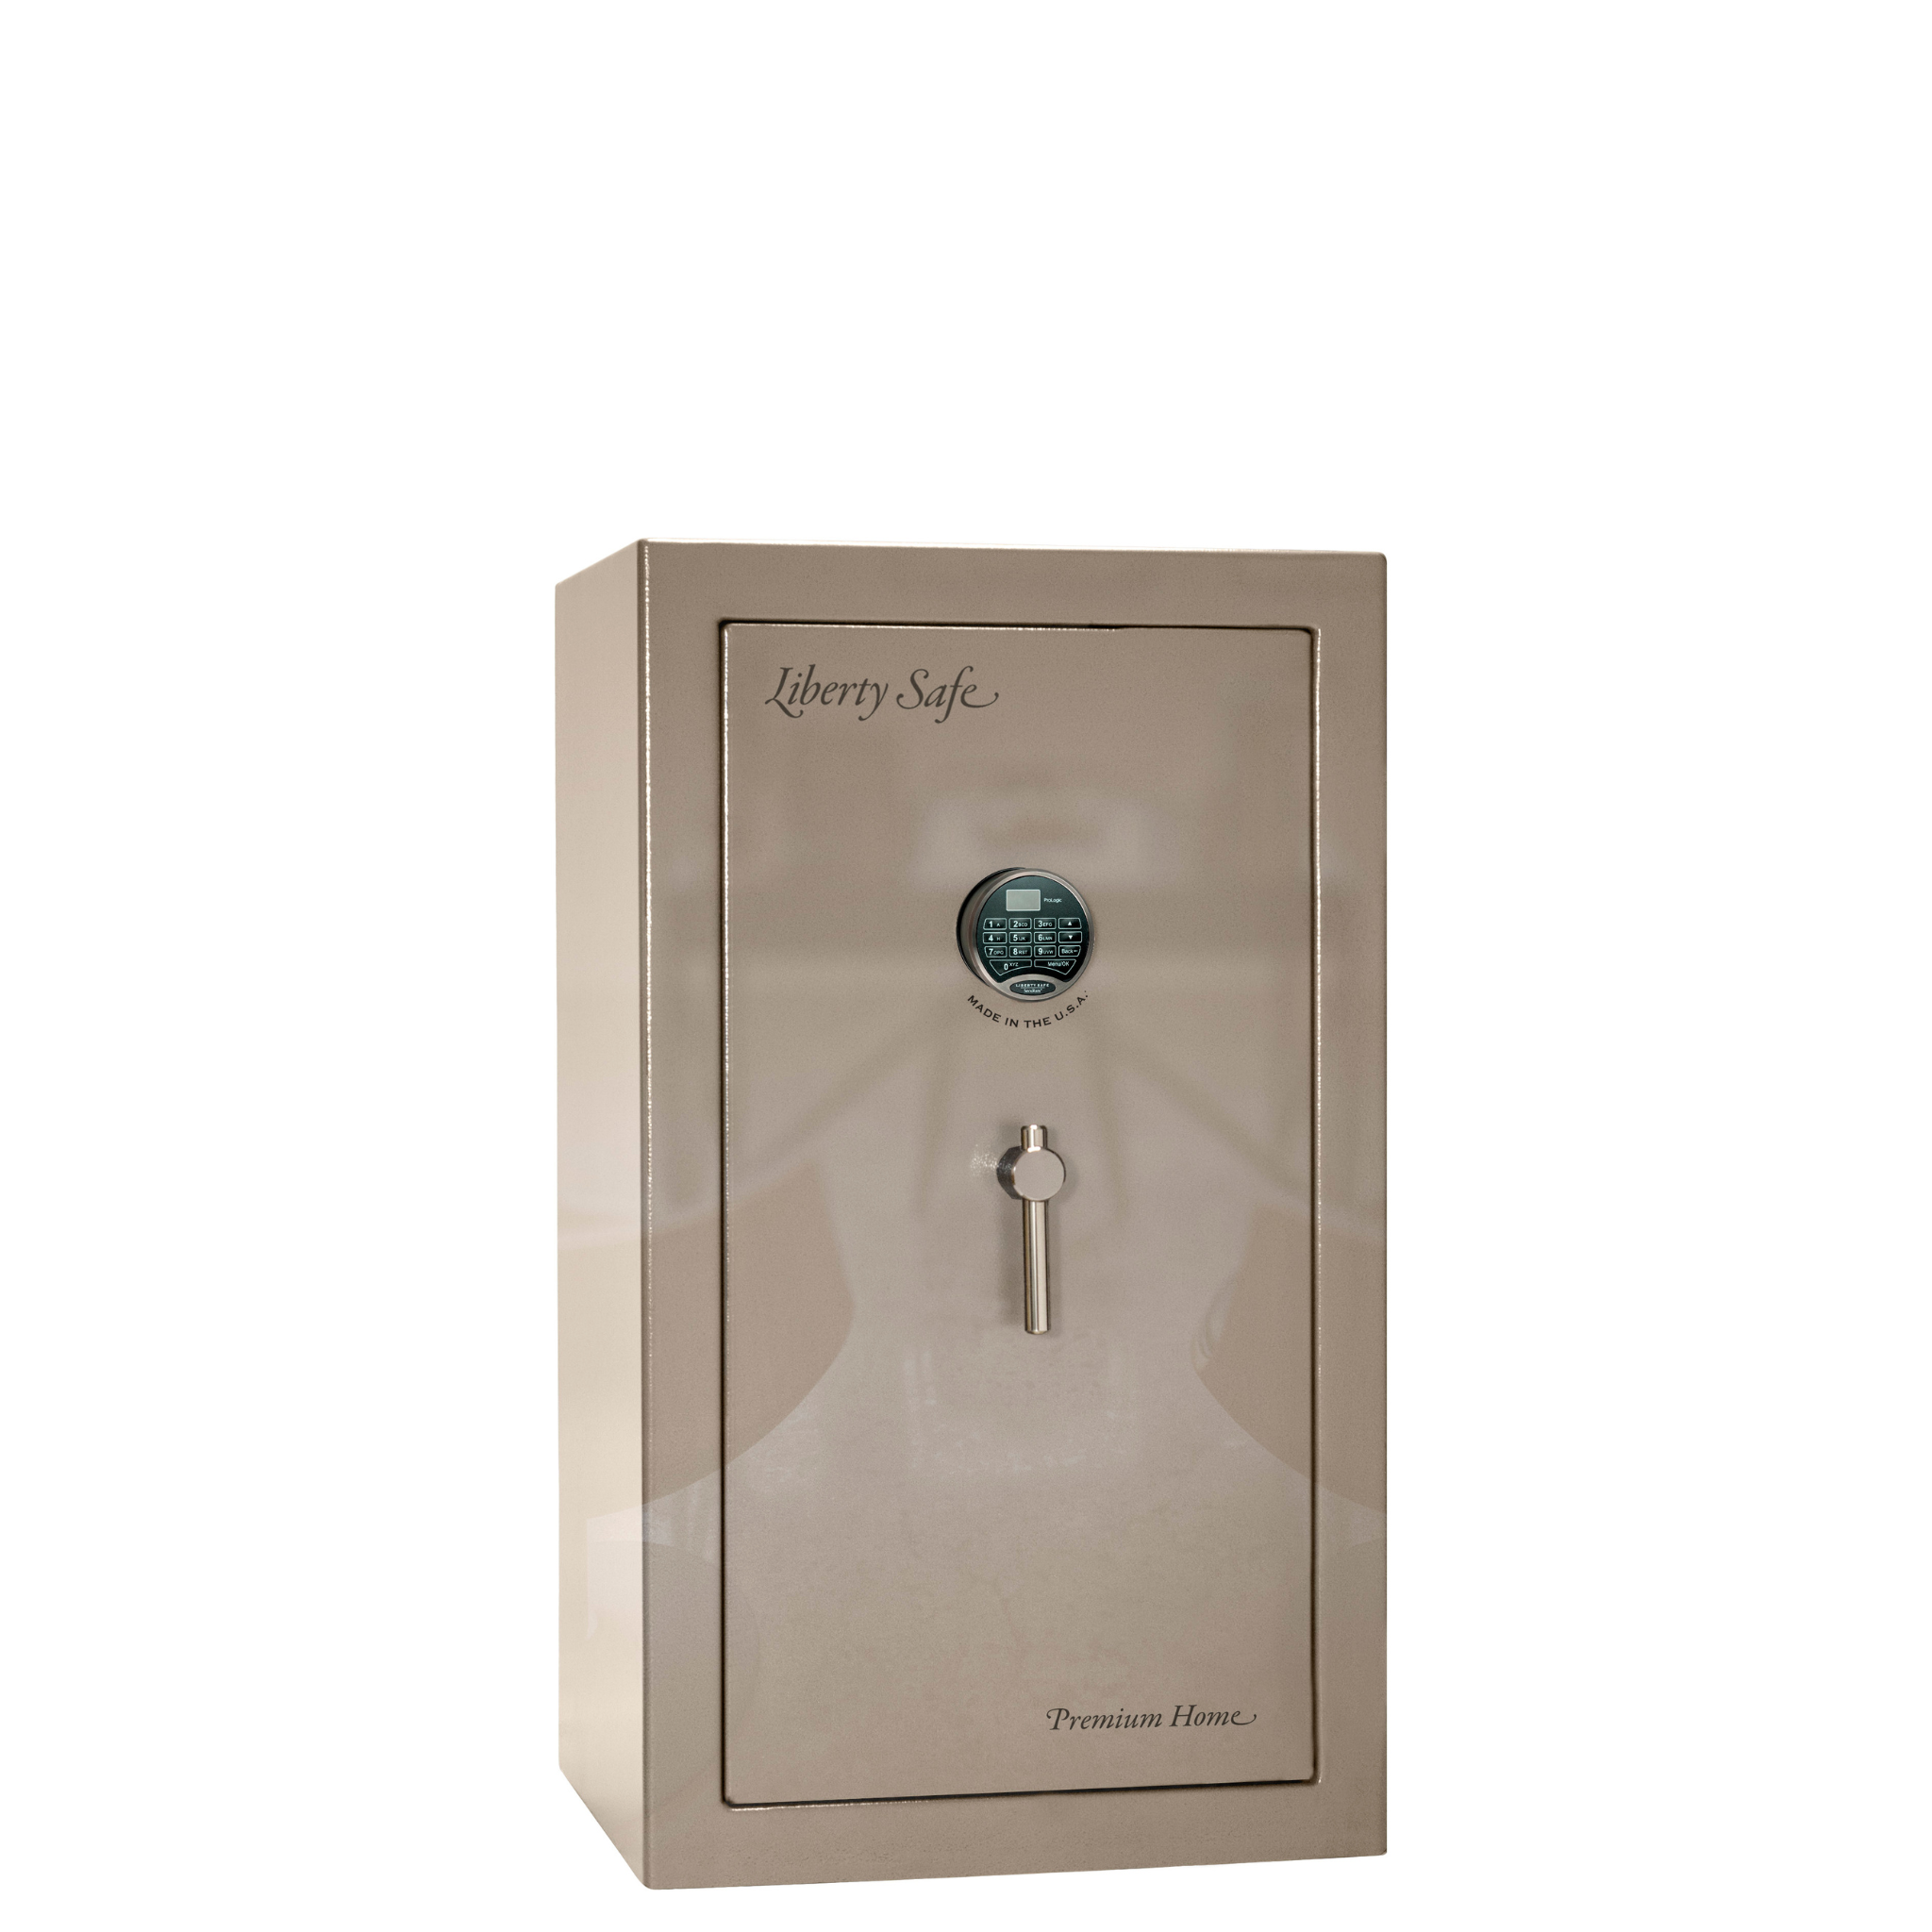 Premium Home Series | Level 7 Security | 2 Hour Fire Protection | 12 | Dimensions: 41.75"(H) x 24.5"(W) x 19"(D) | Champagne Gloss - Closed Door